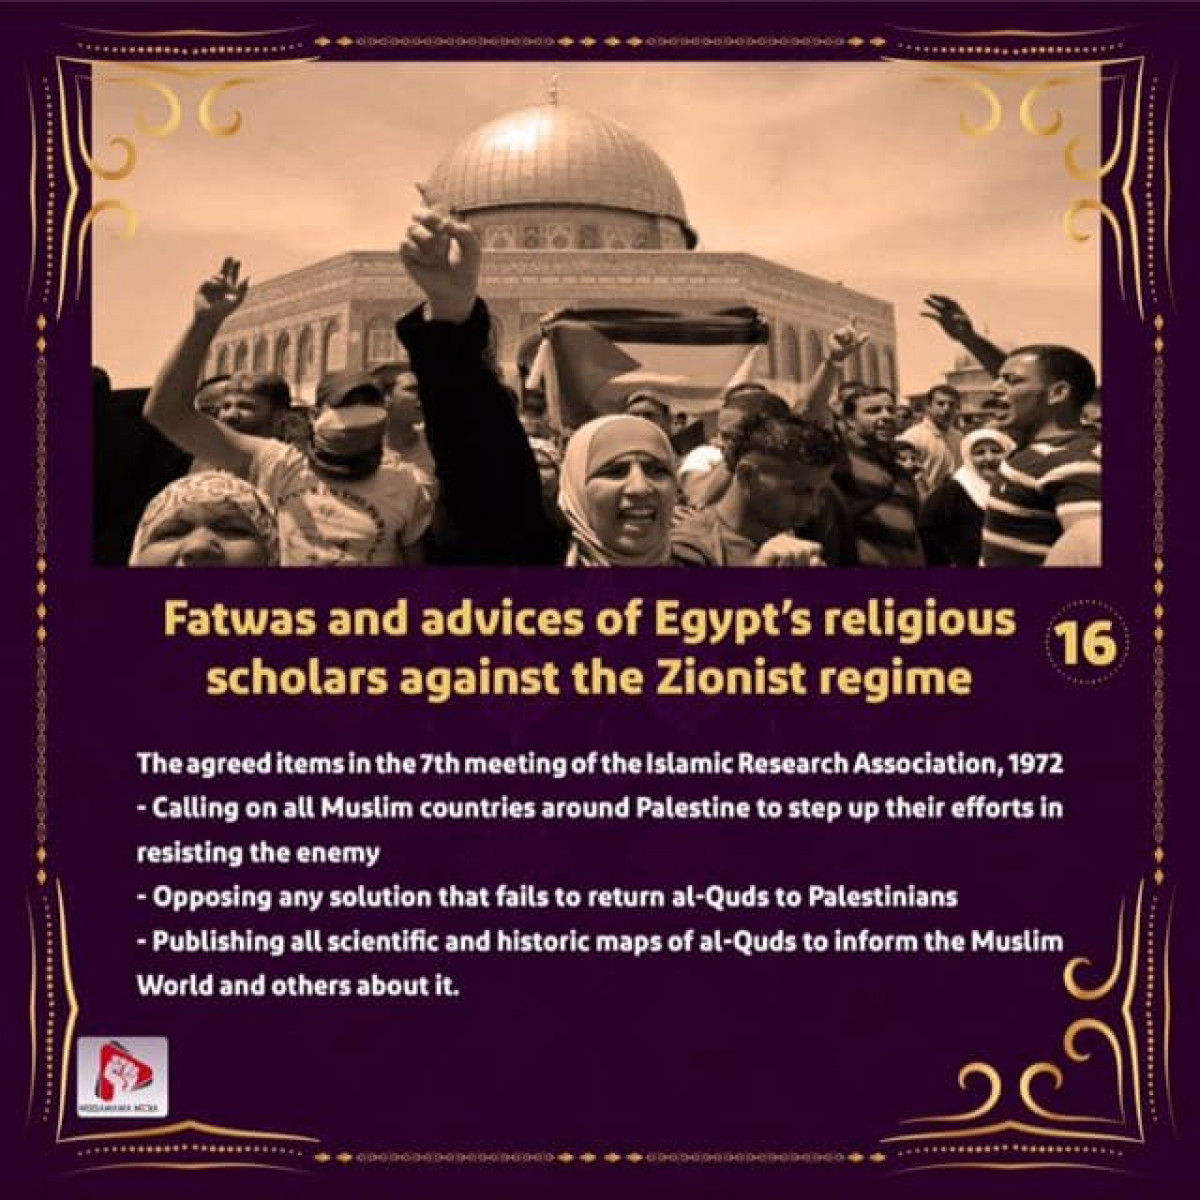 Fatwas and advices of Egypt's religious scholars against the Zionist regime 16